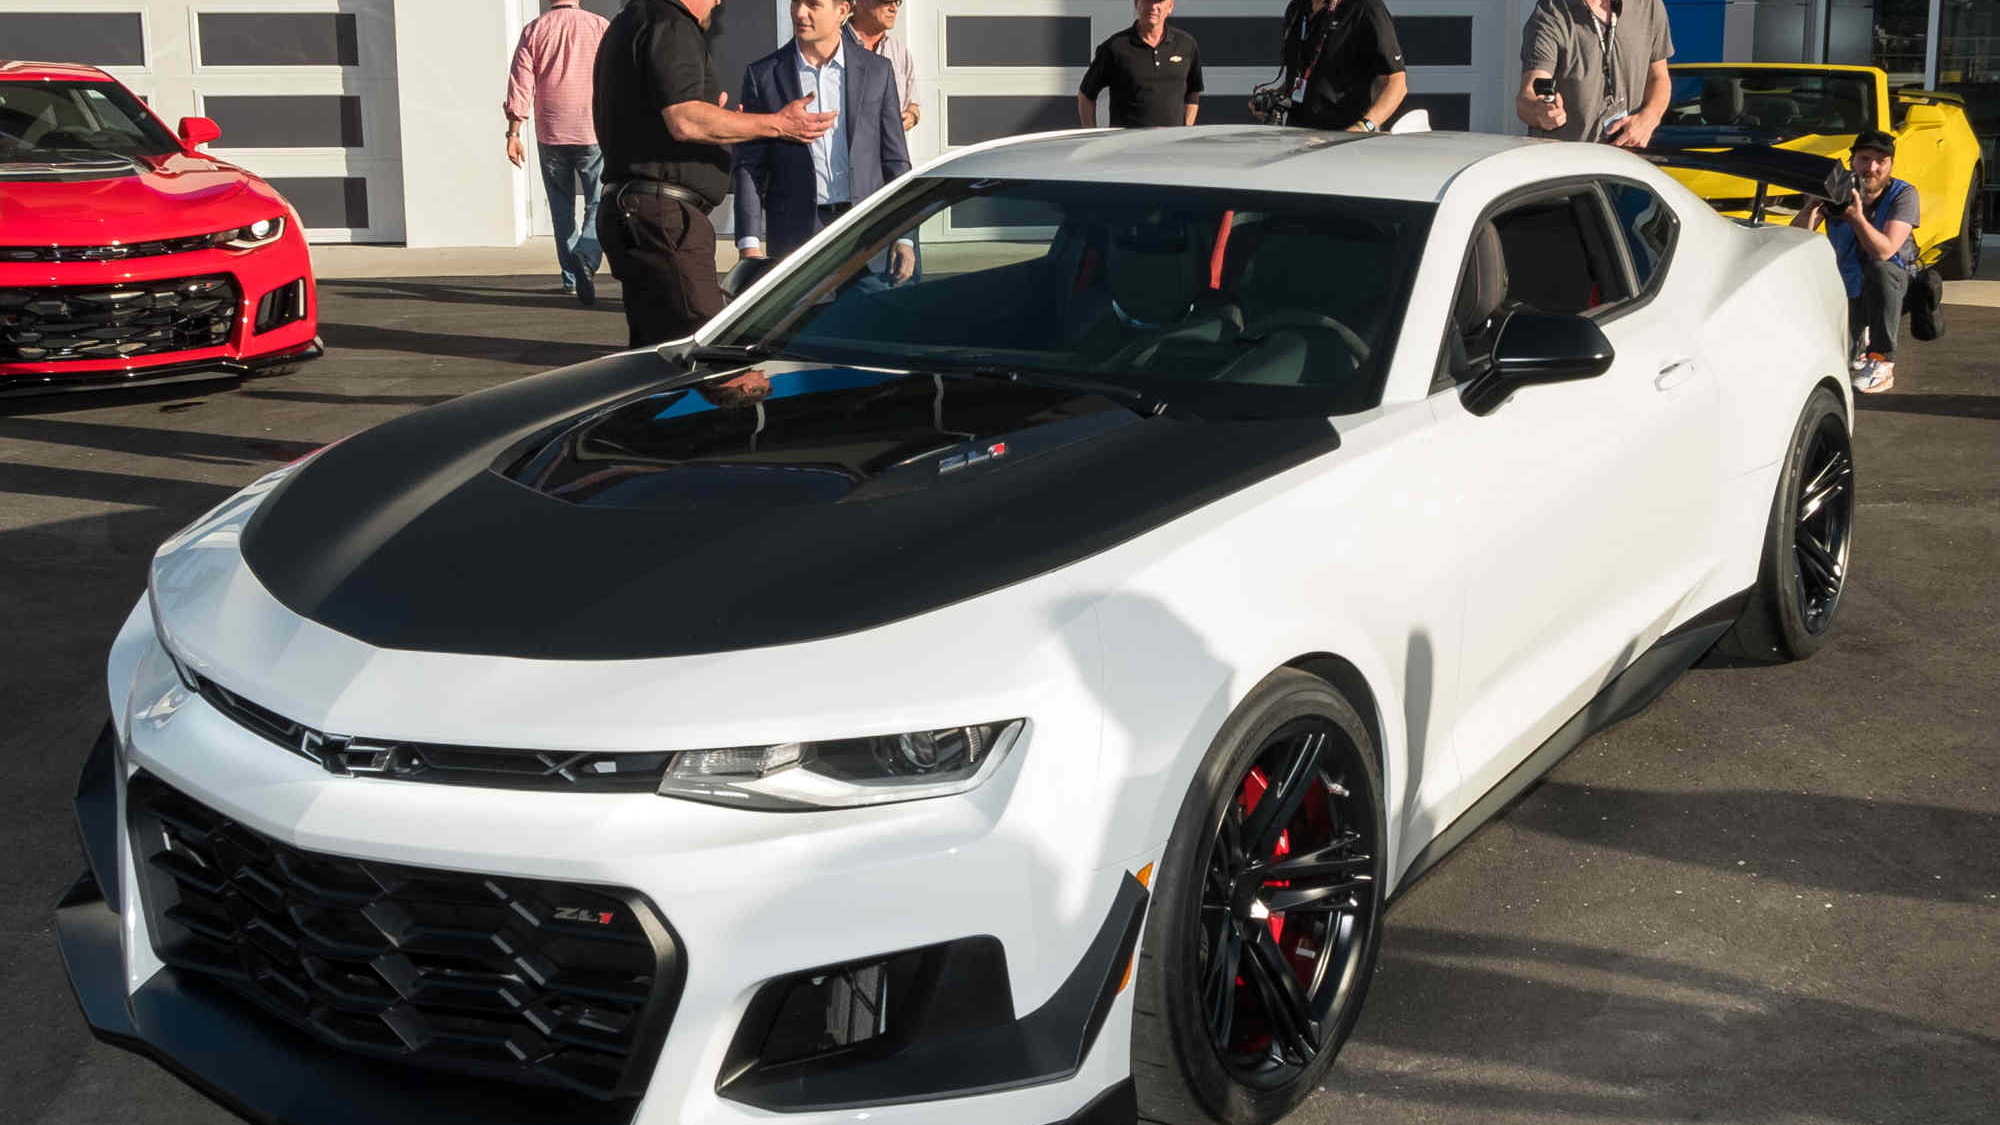 2018 Chevrolet Camaro Zl1 1le Priced From 69 995